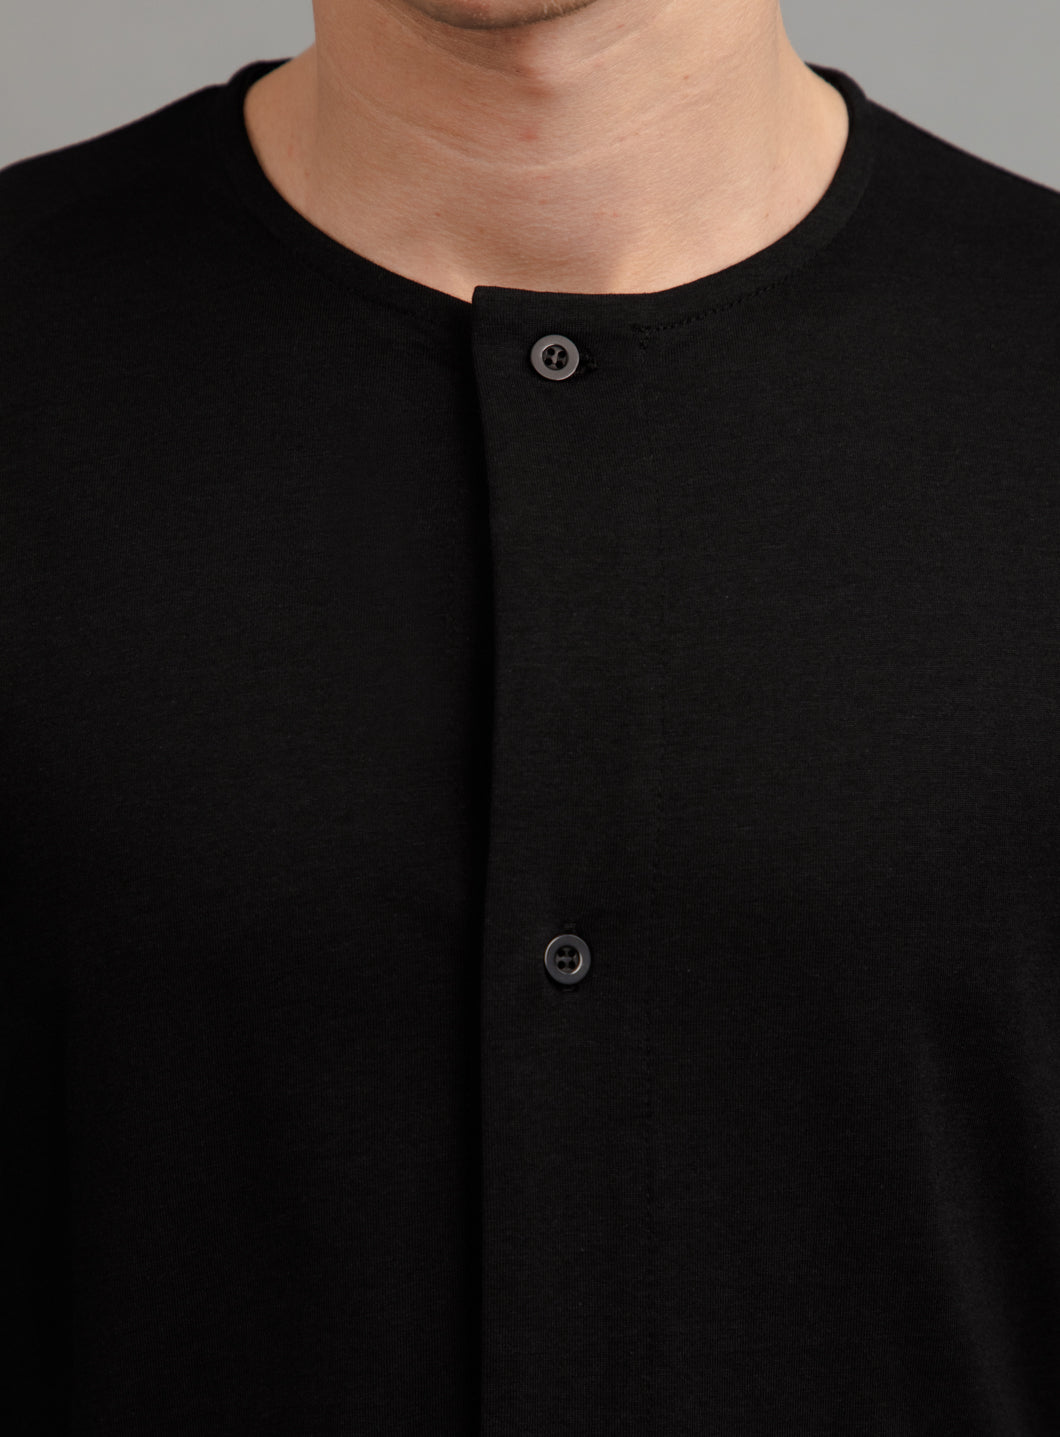 Long Sleeve T-Shirt with 5 Buttons in Black Eucalyptus & Cotton